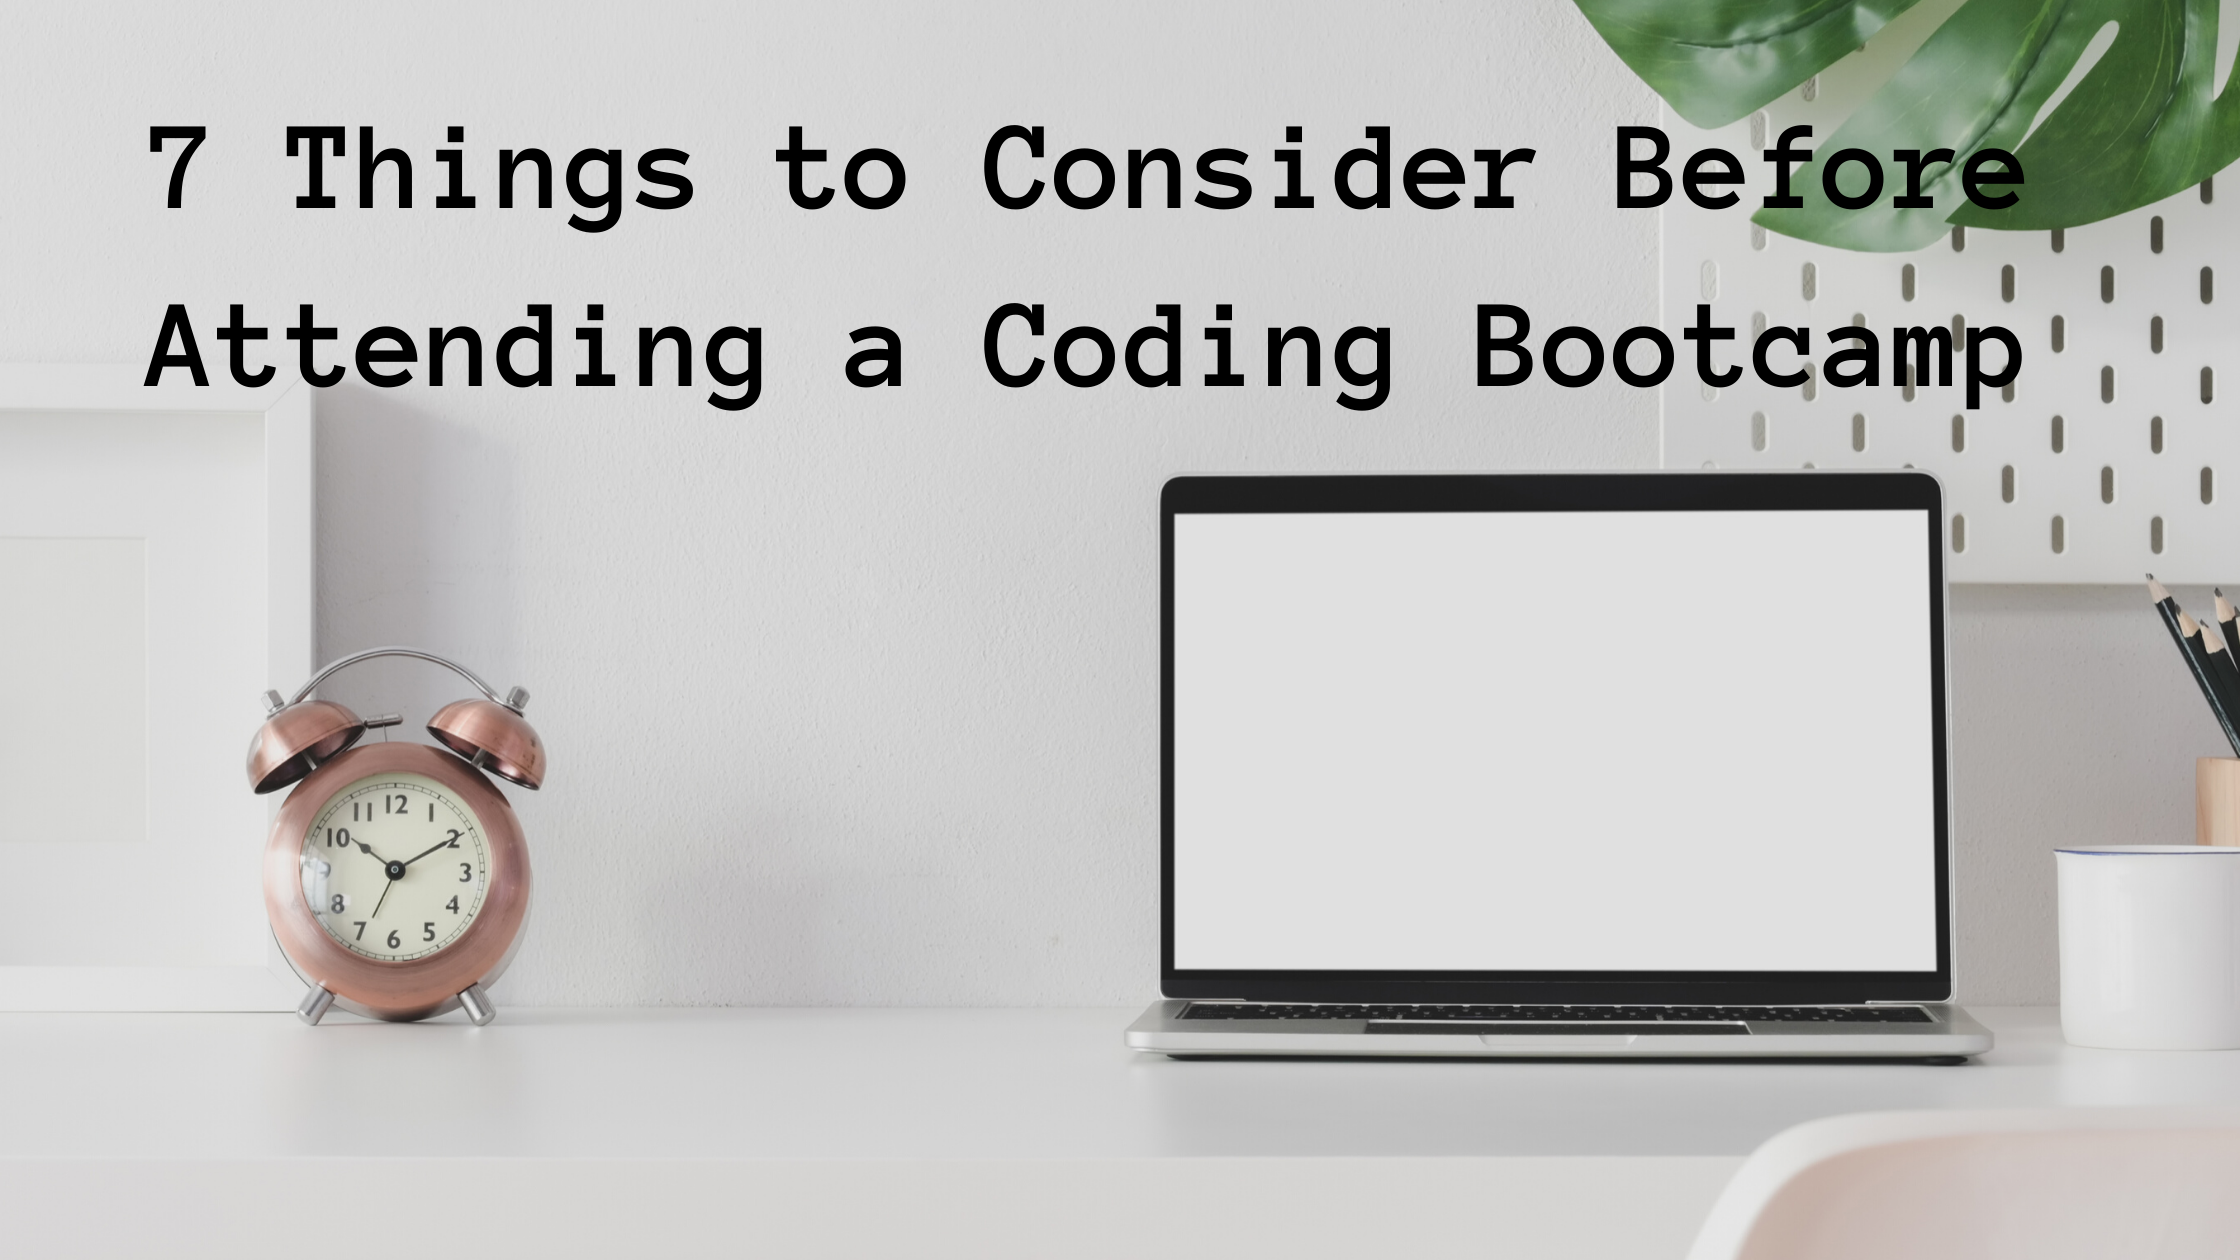 7 Things to Consider Before Attending a Coding Bootcamp